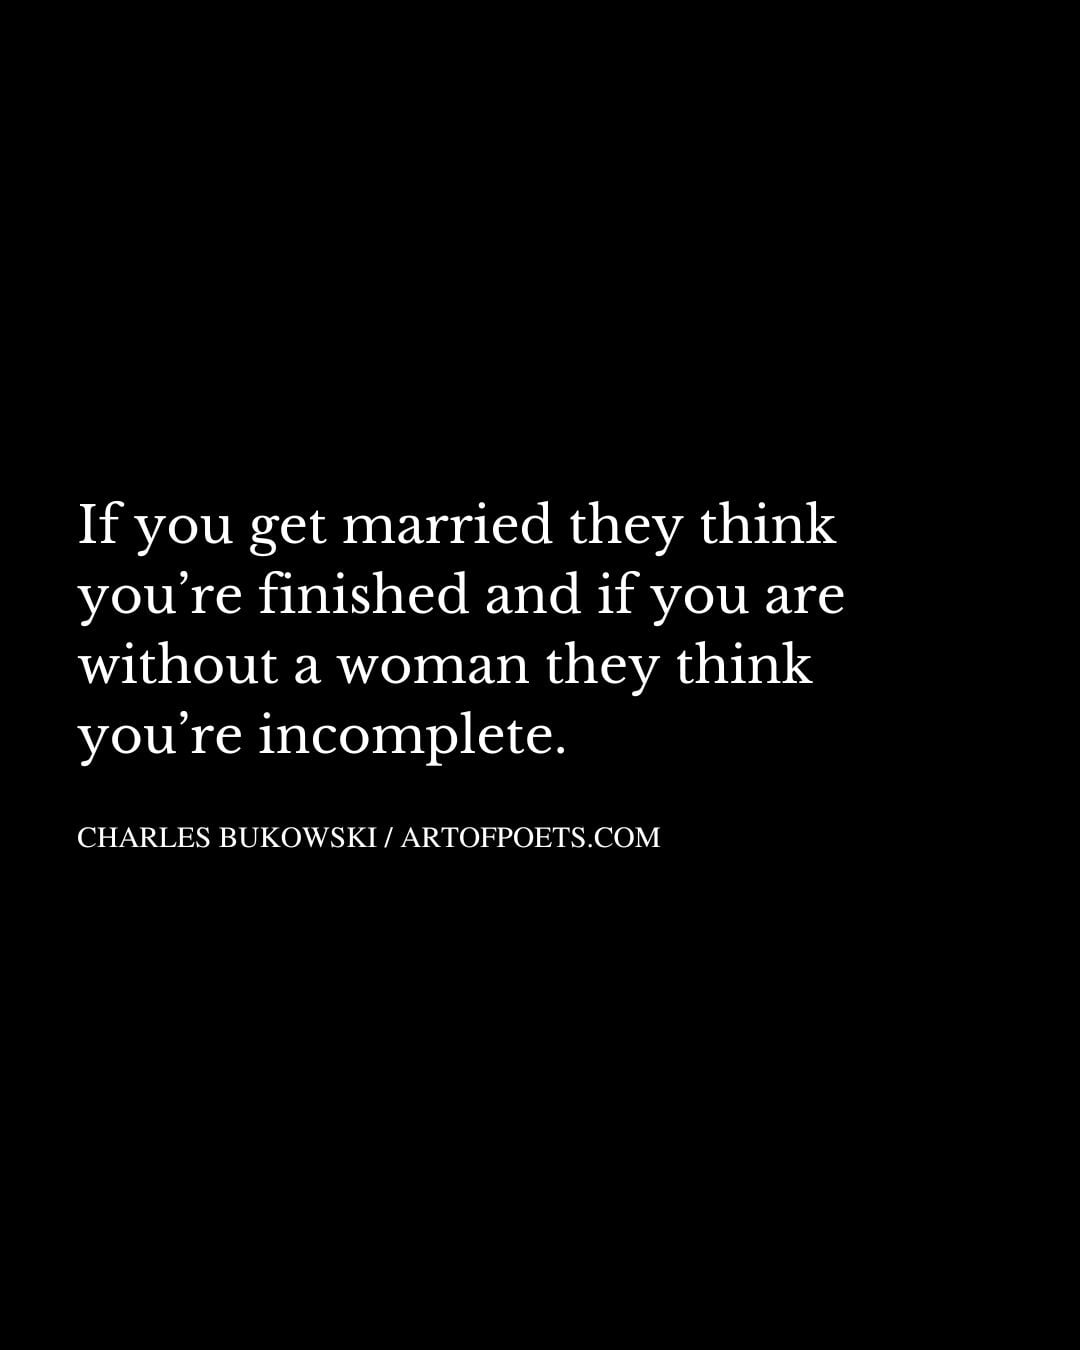 If you get married they think youre finished and if you are without a woman they think youre incomplete